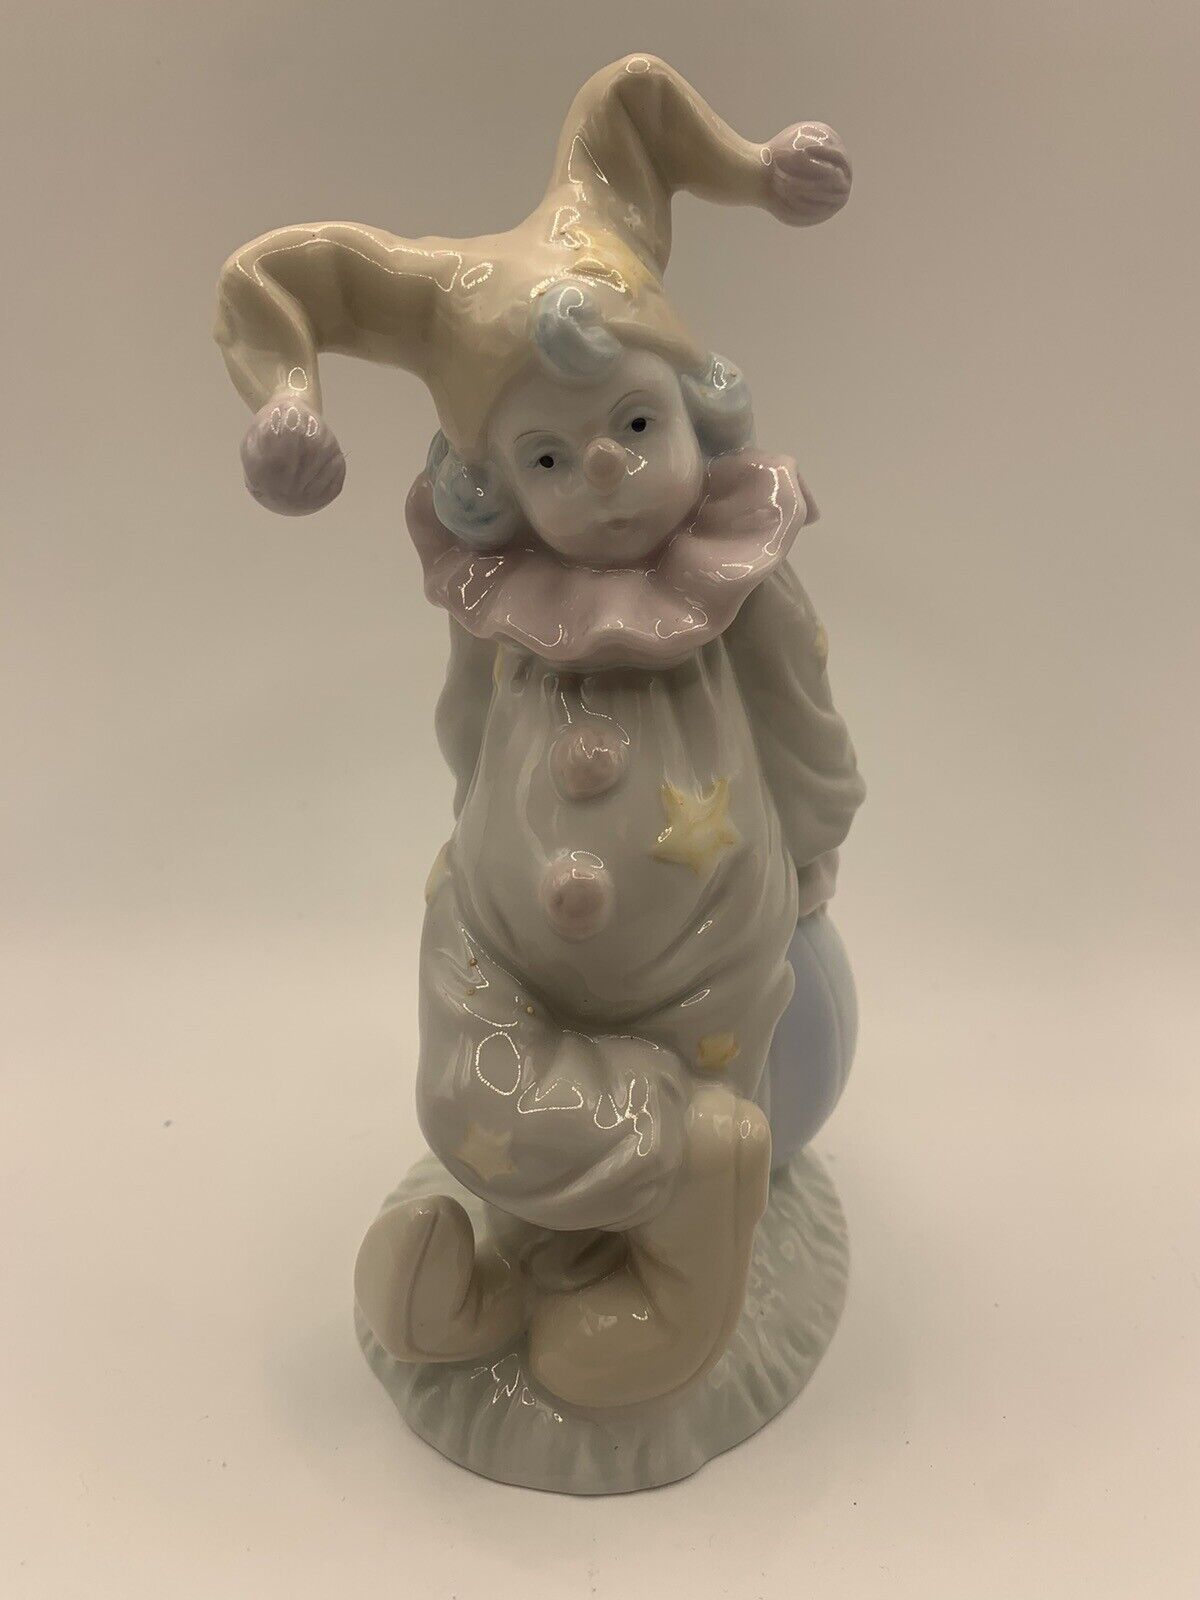 LlADRO Styled Somber Boy Clown Colorful REPLACEMENT